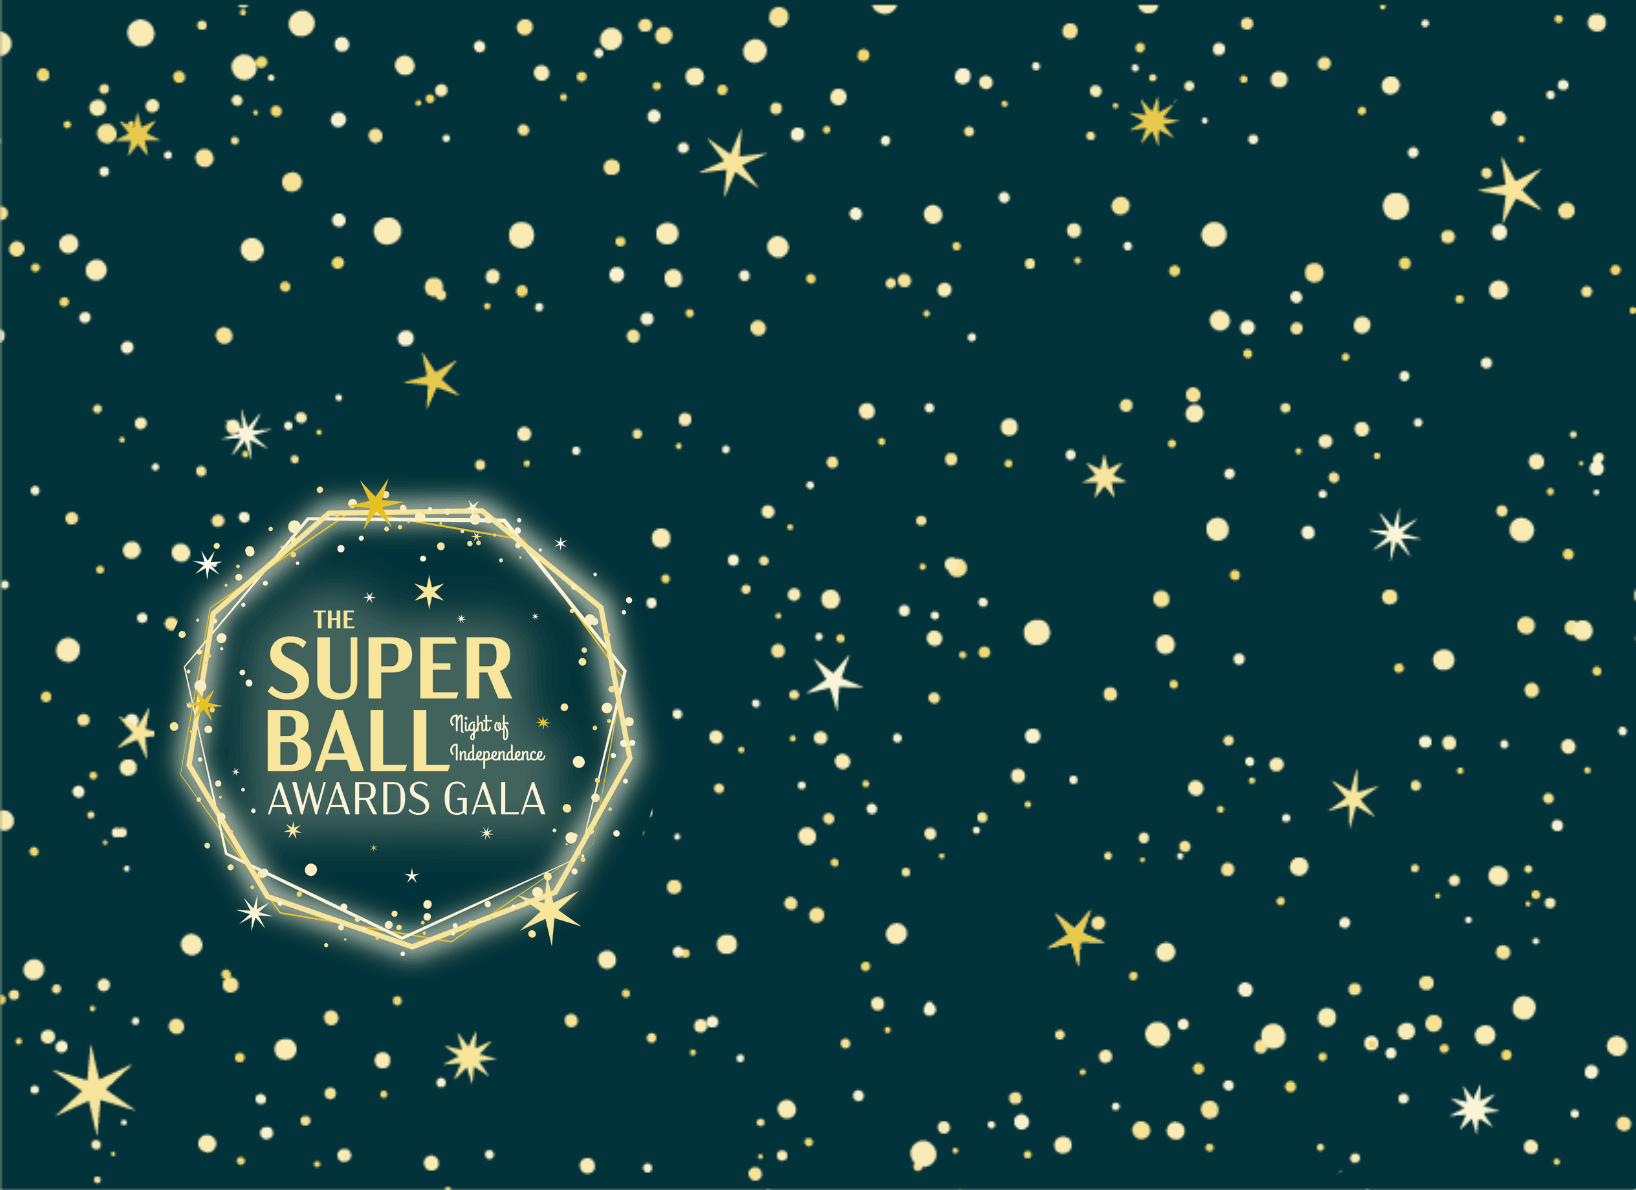 The Super Ball - Night of Independence Awards Gala